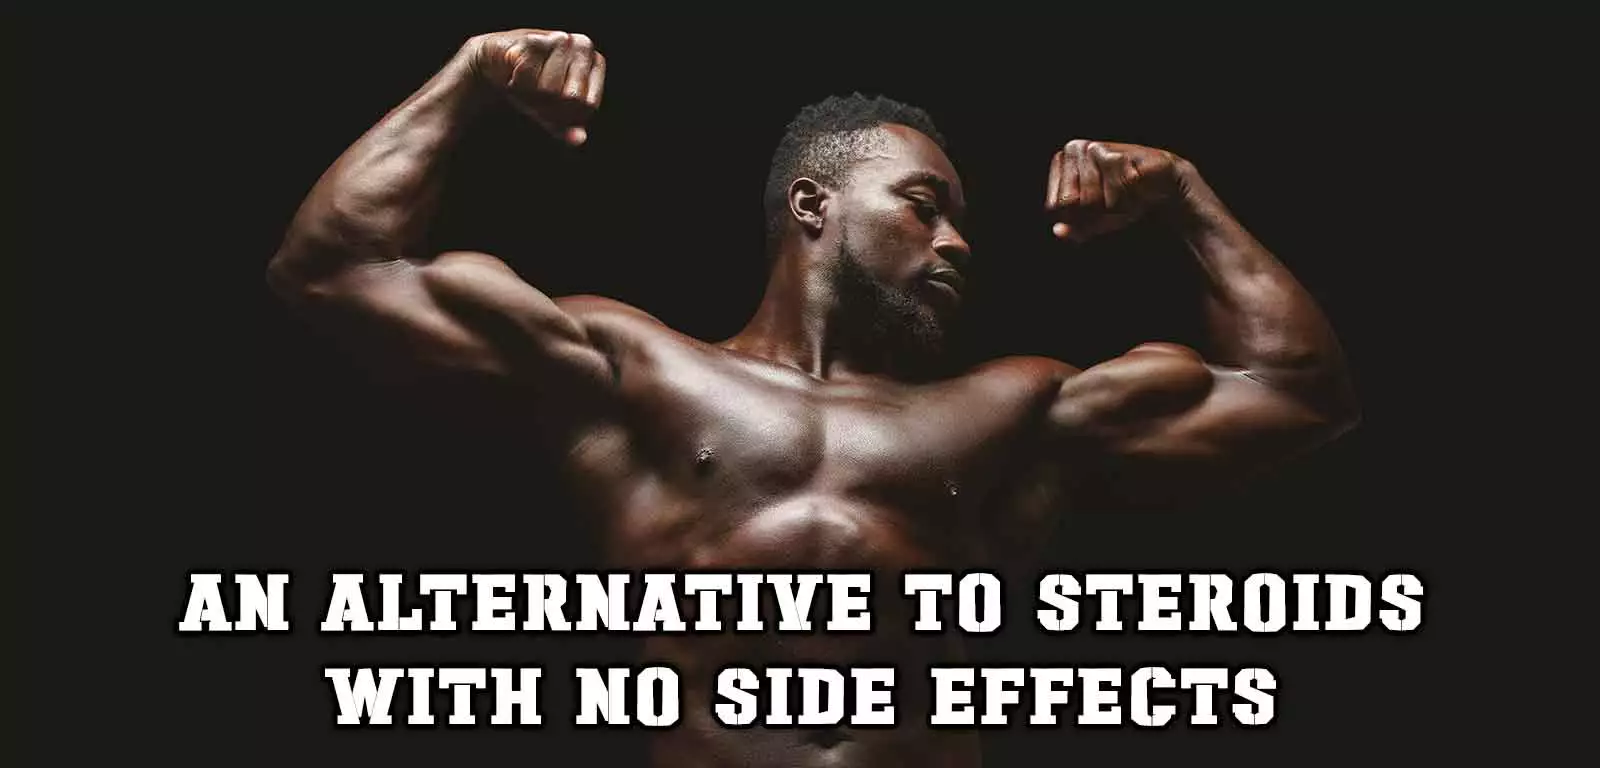 A way to increase muscle growth and strength